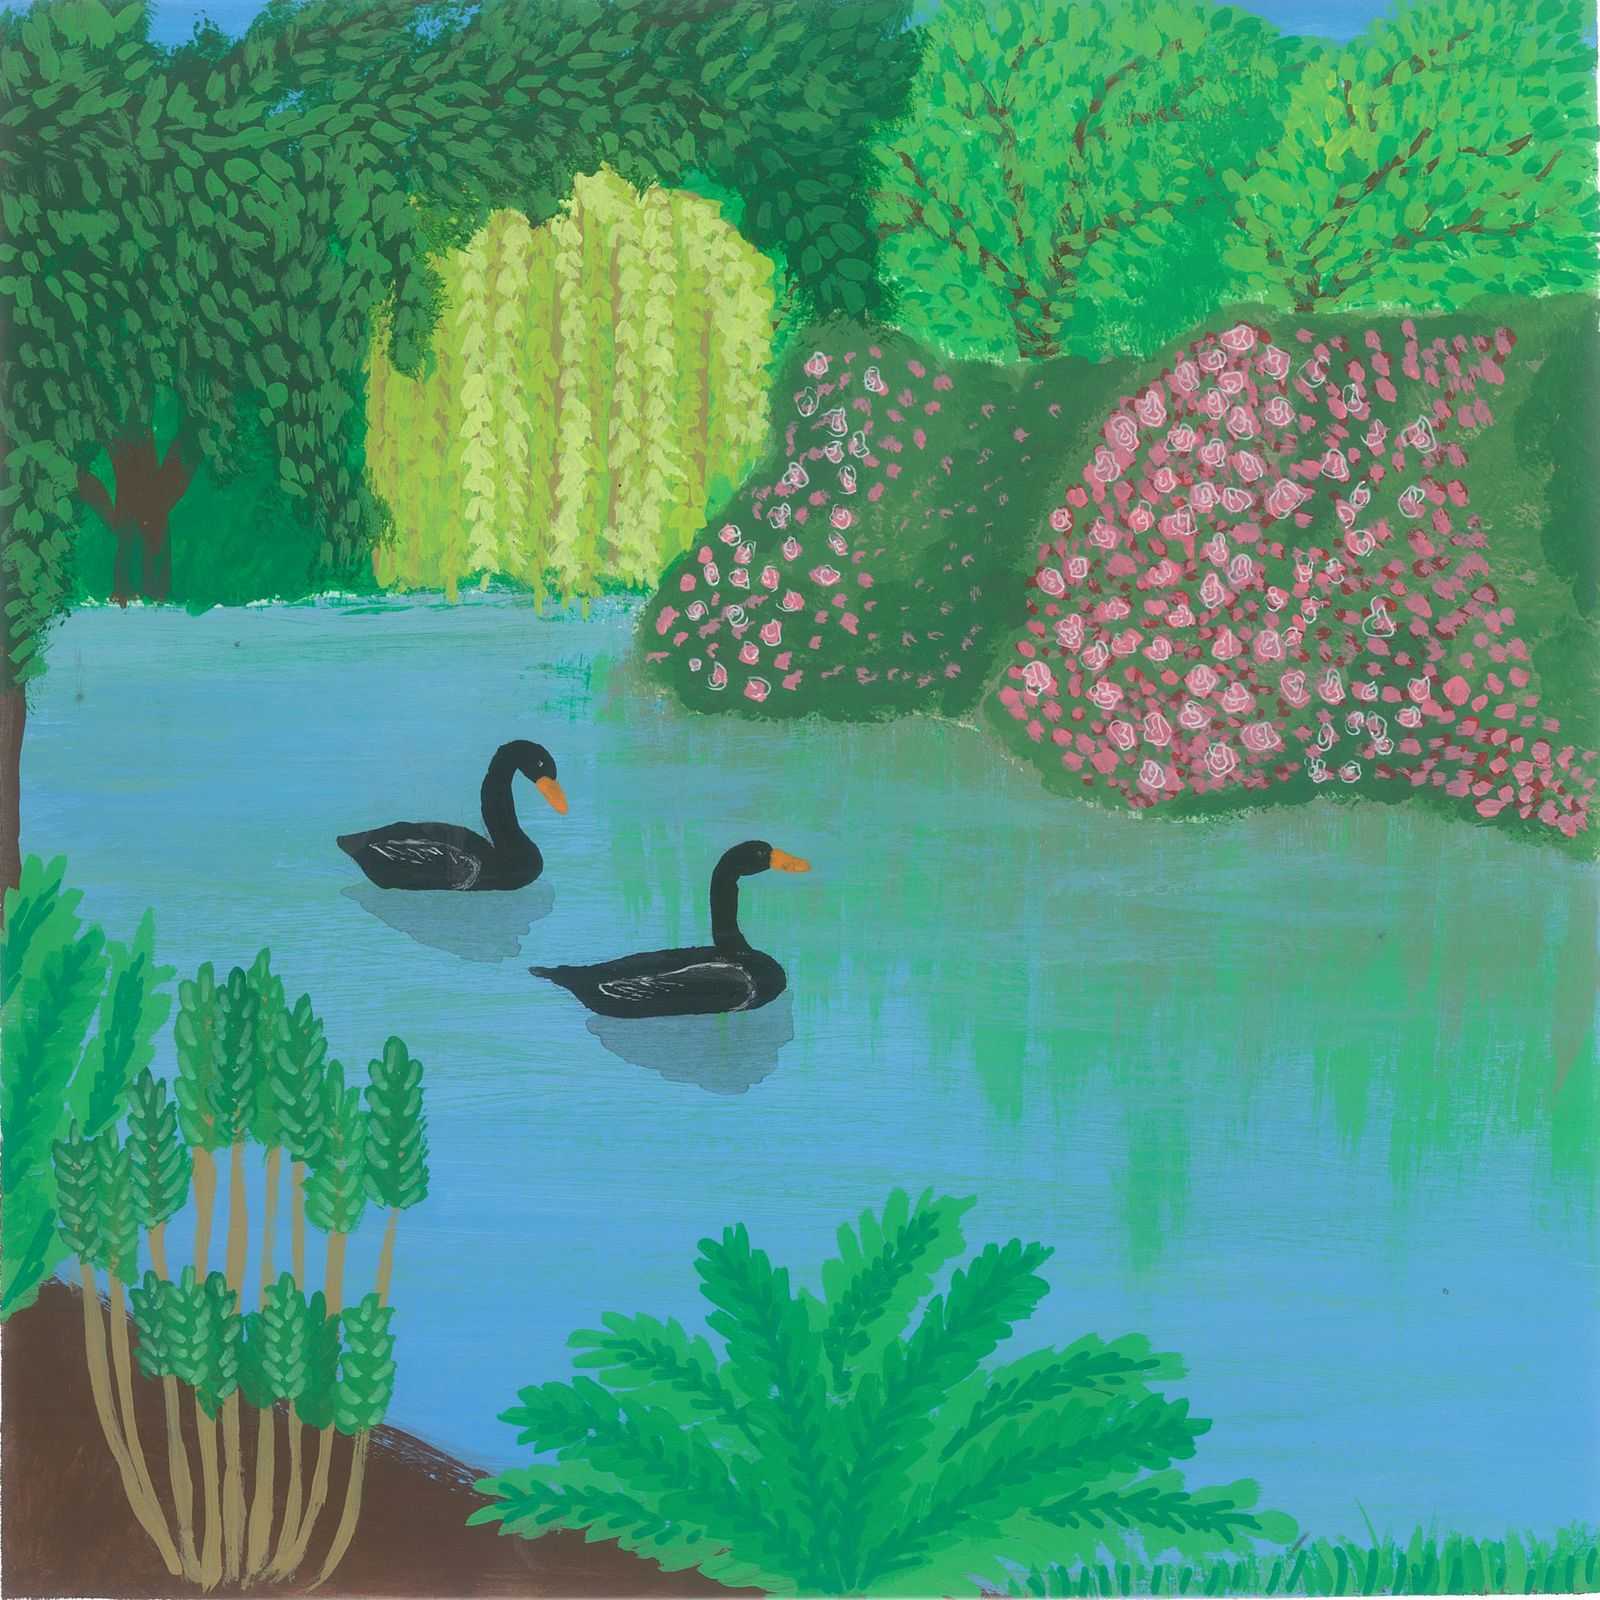 Brent Geese grazing - nature landscape painting - earth.fm